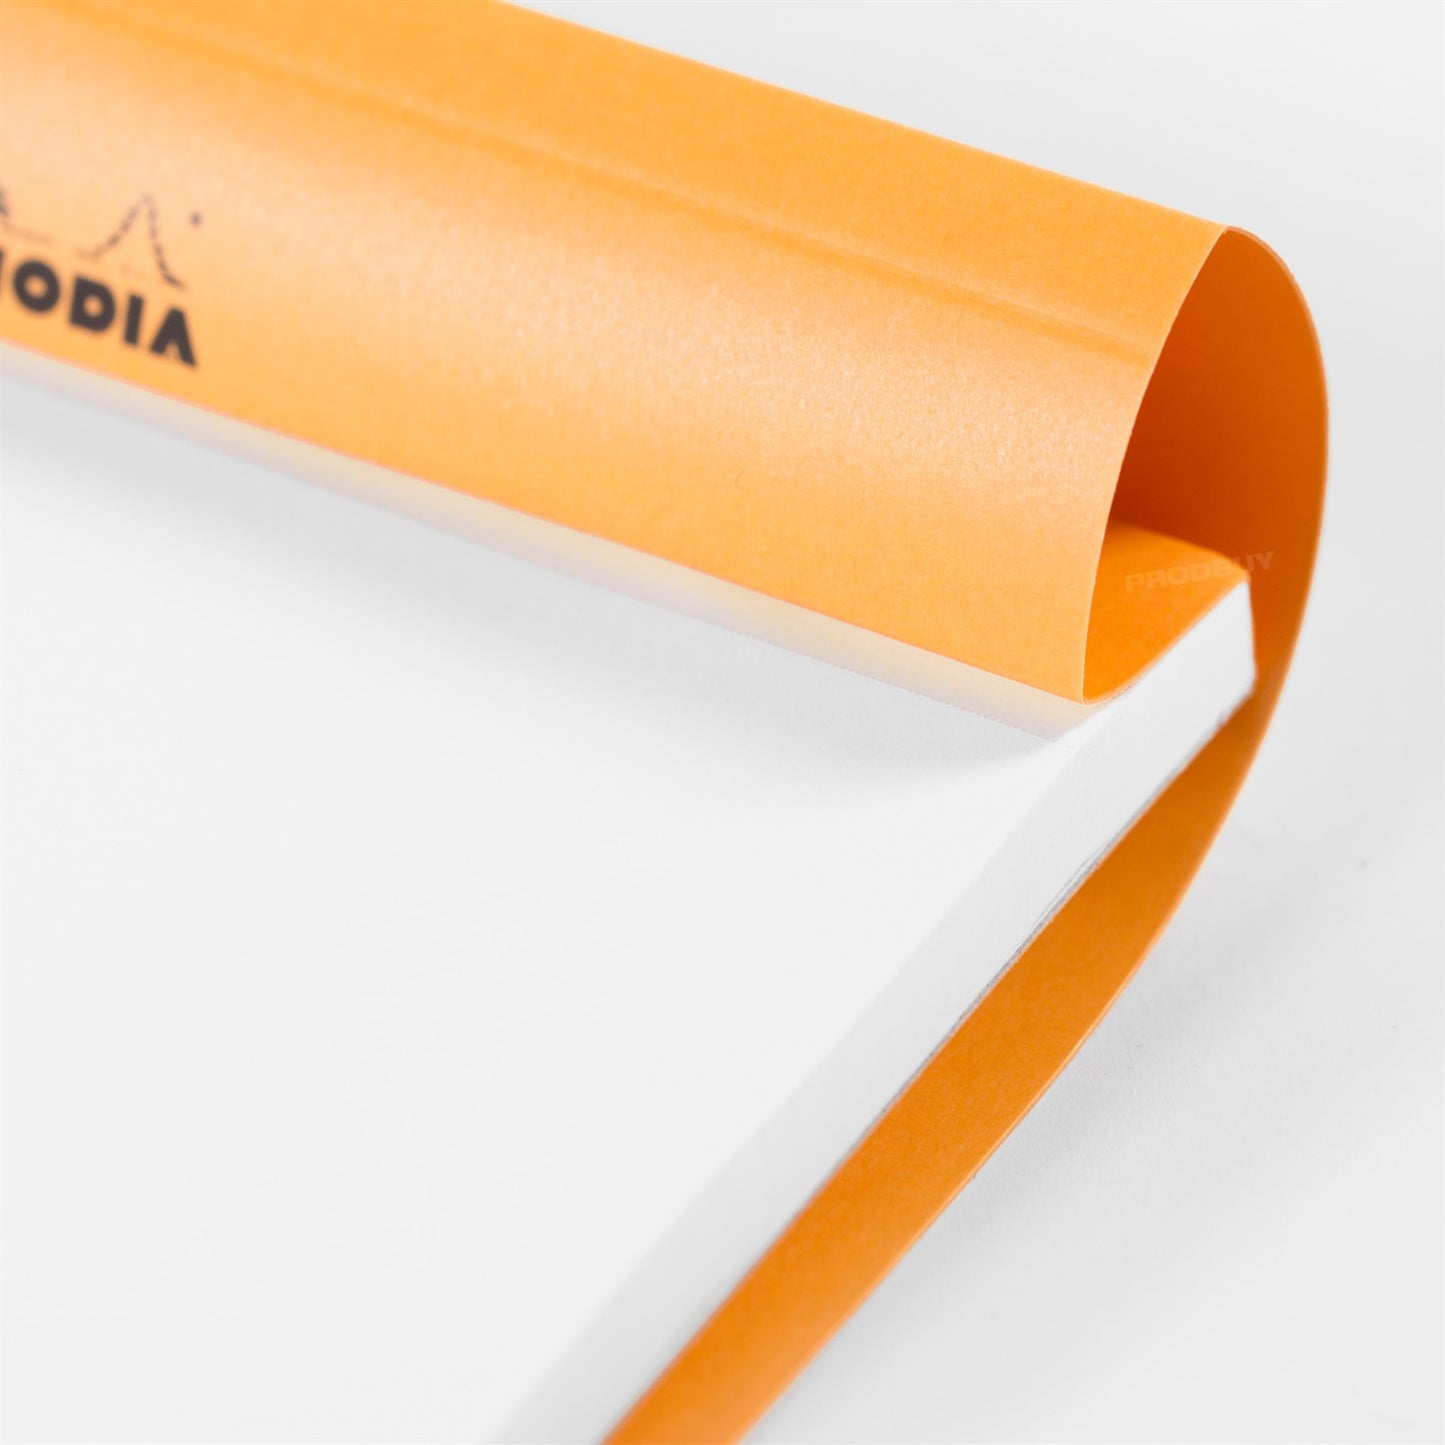 Set of 3 Rhodia A5 Blank Artist's Sketching Pads with Orange Covers & Plain White Sheets